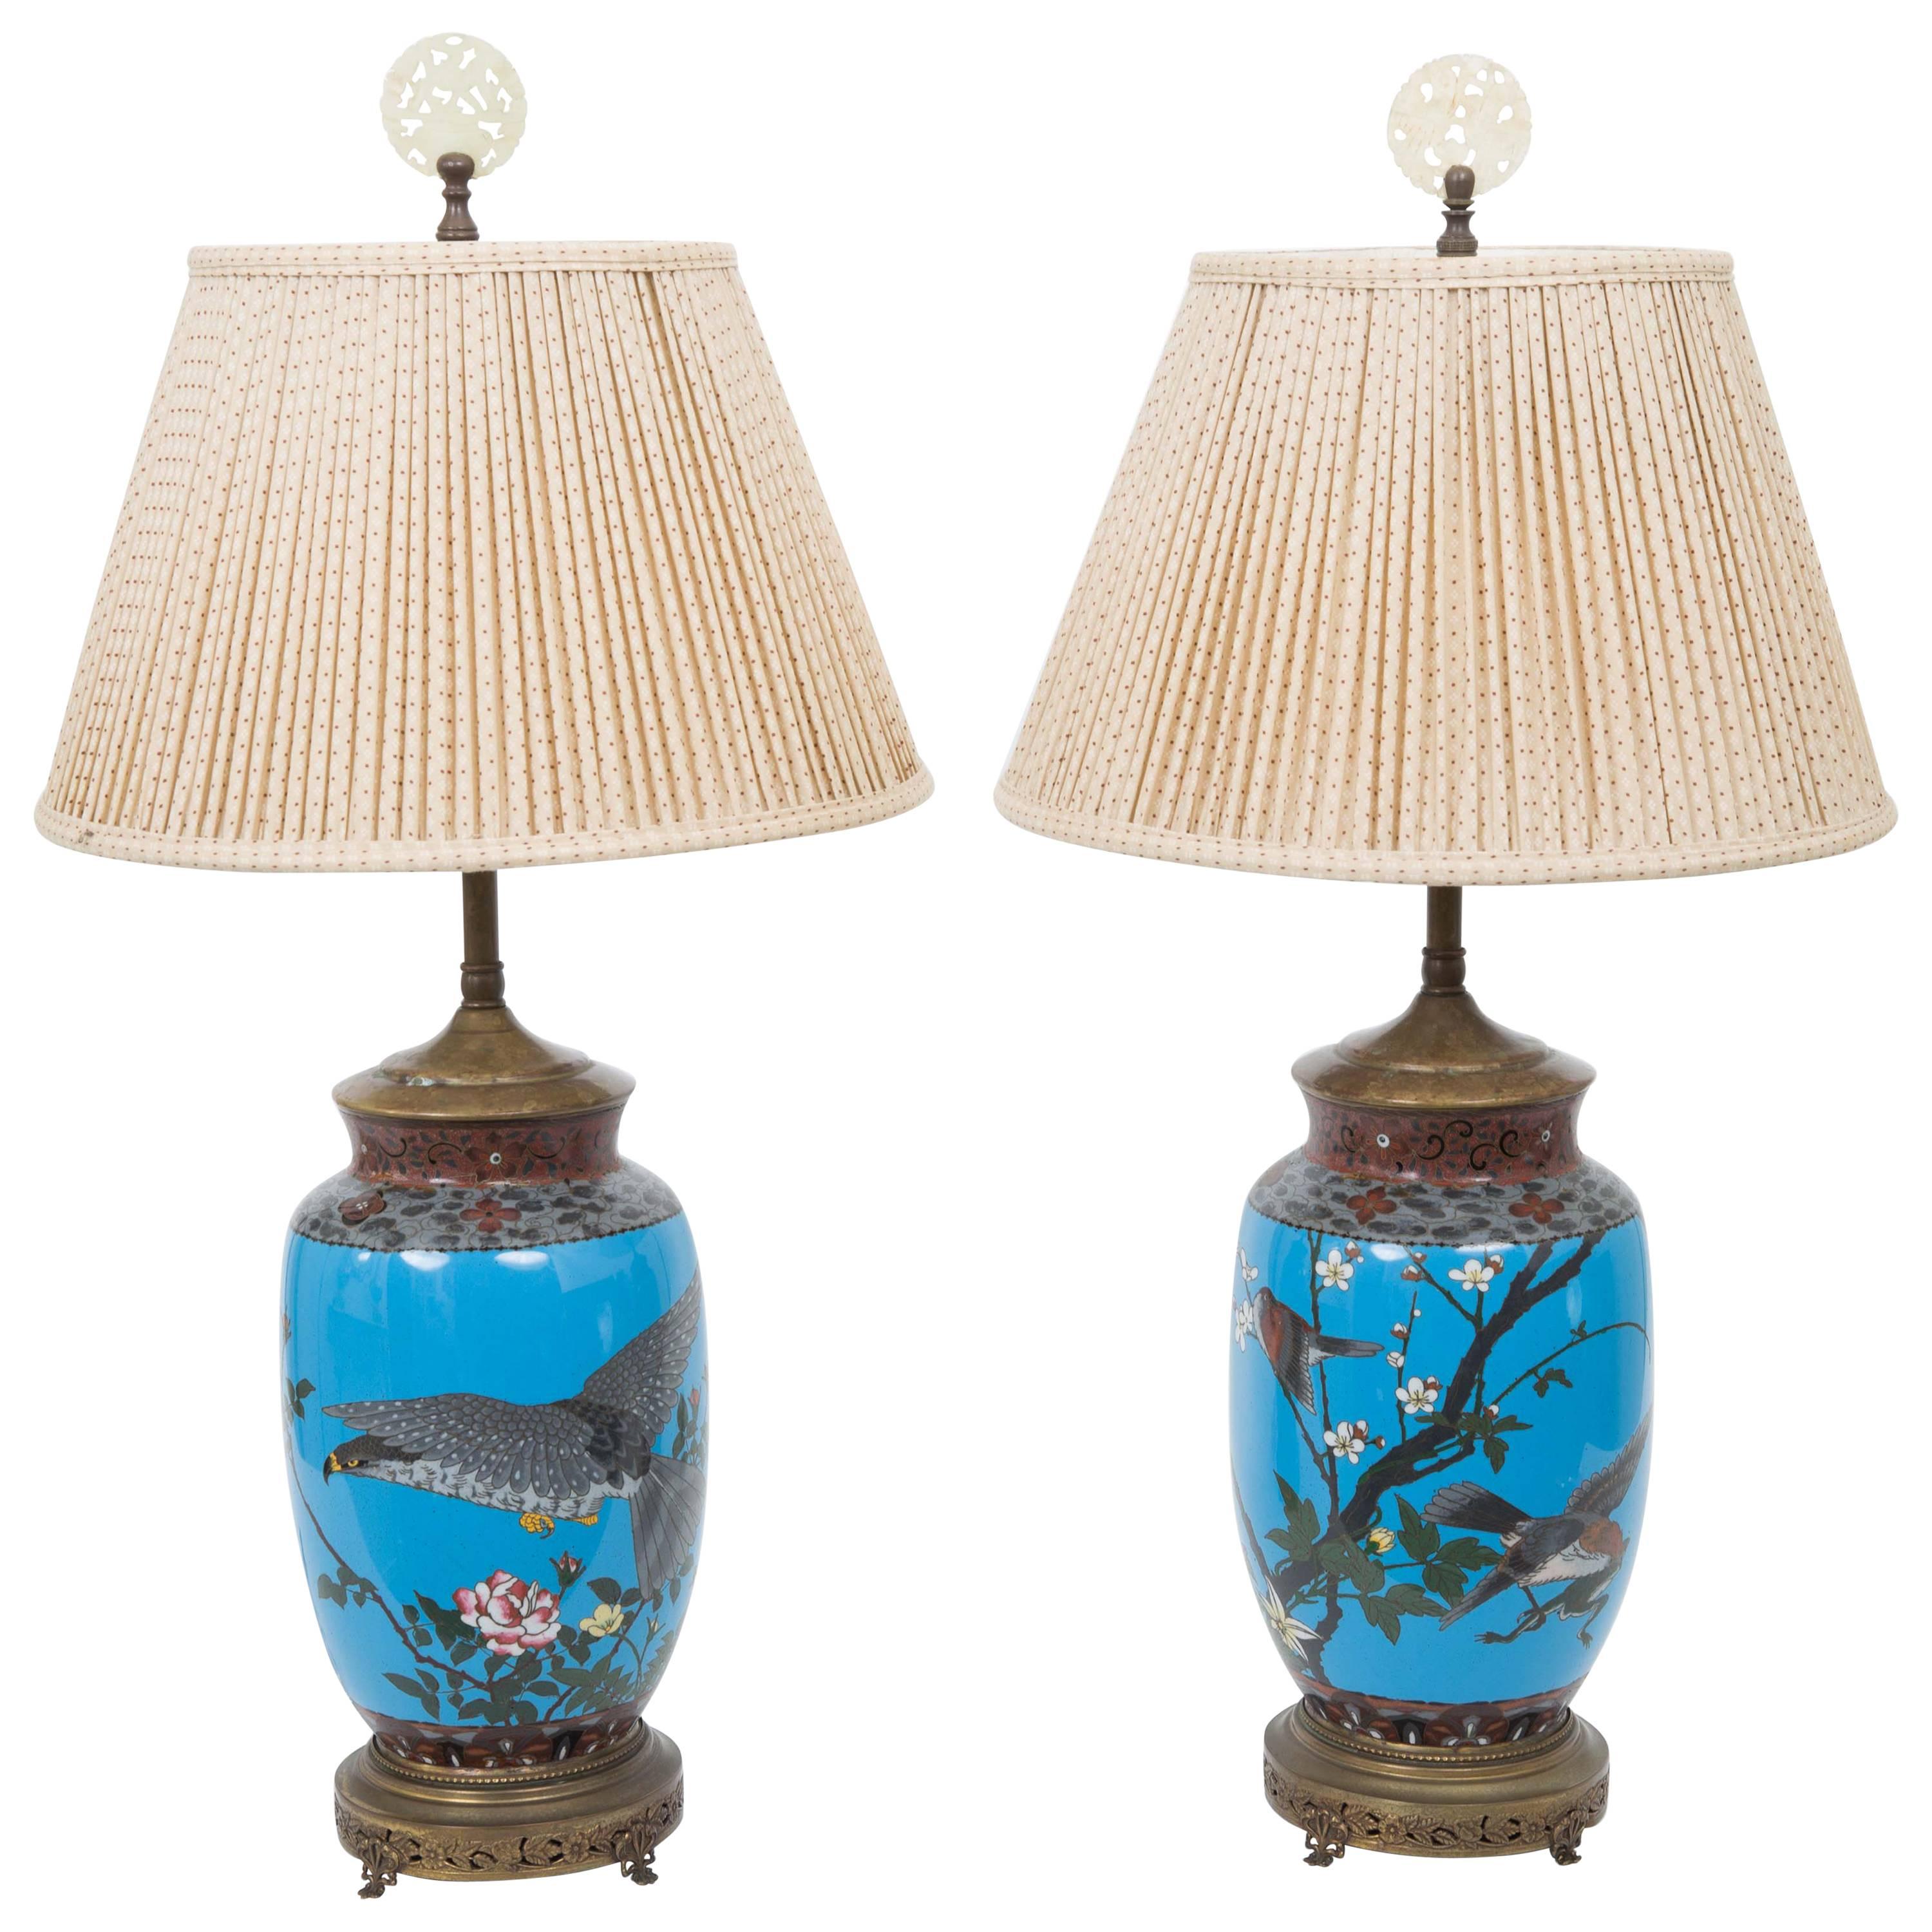 Pair of Early 20th Century Japanese Cloisonne Table Lamps